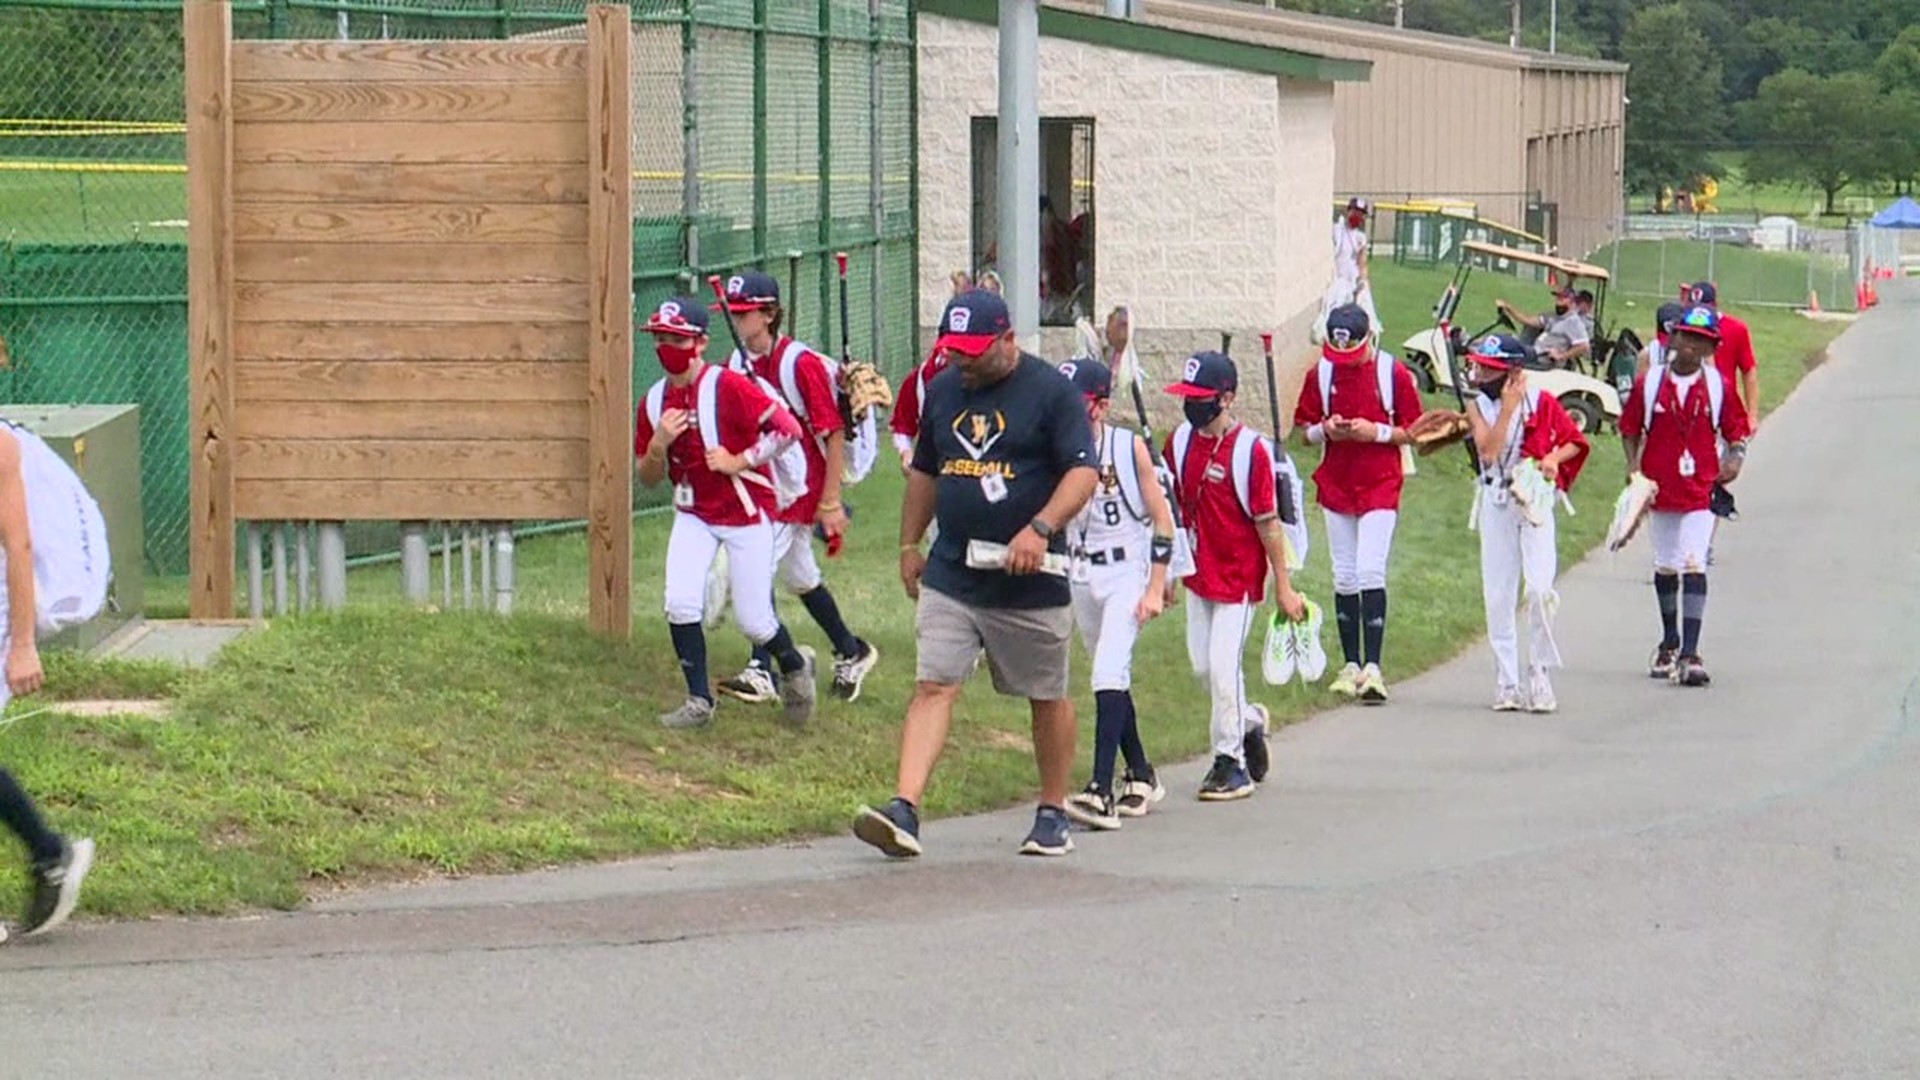 Newswatch 16's Chris Keating caught up with the players and coaches from Upper Providence Little League.